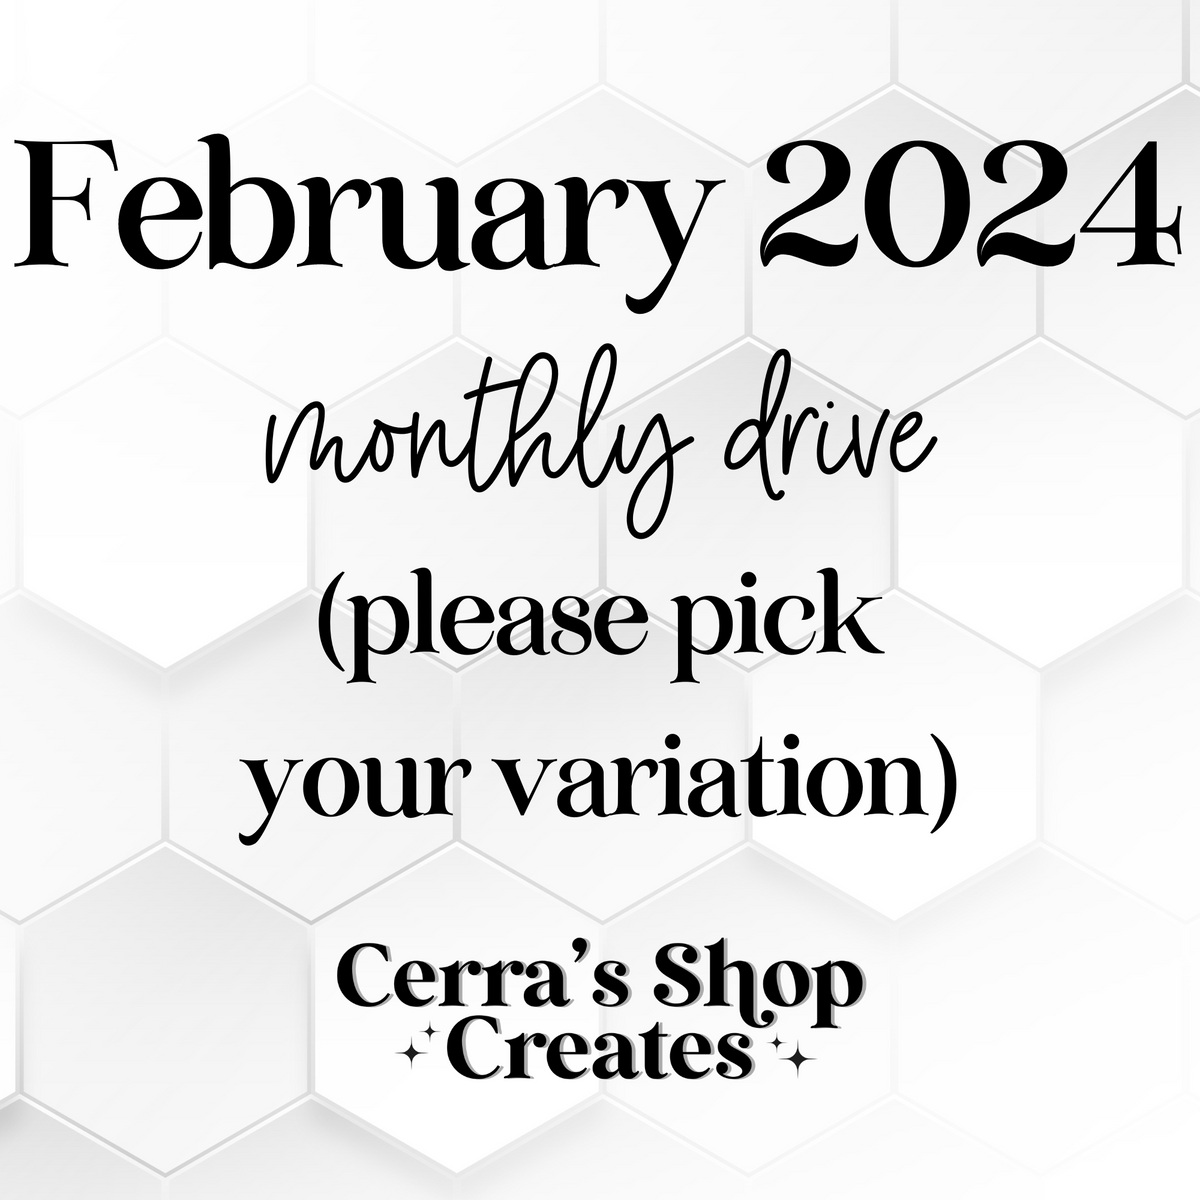 February 2024 Drives (please pick your variation)